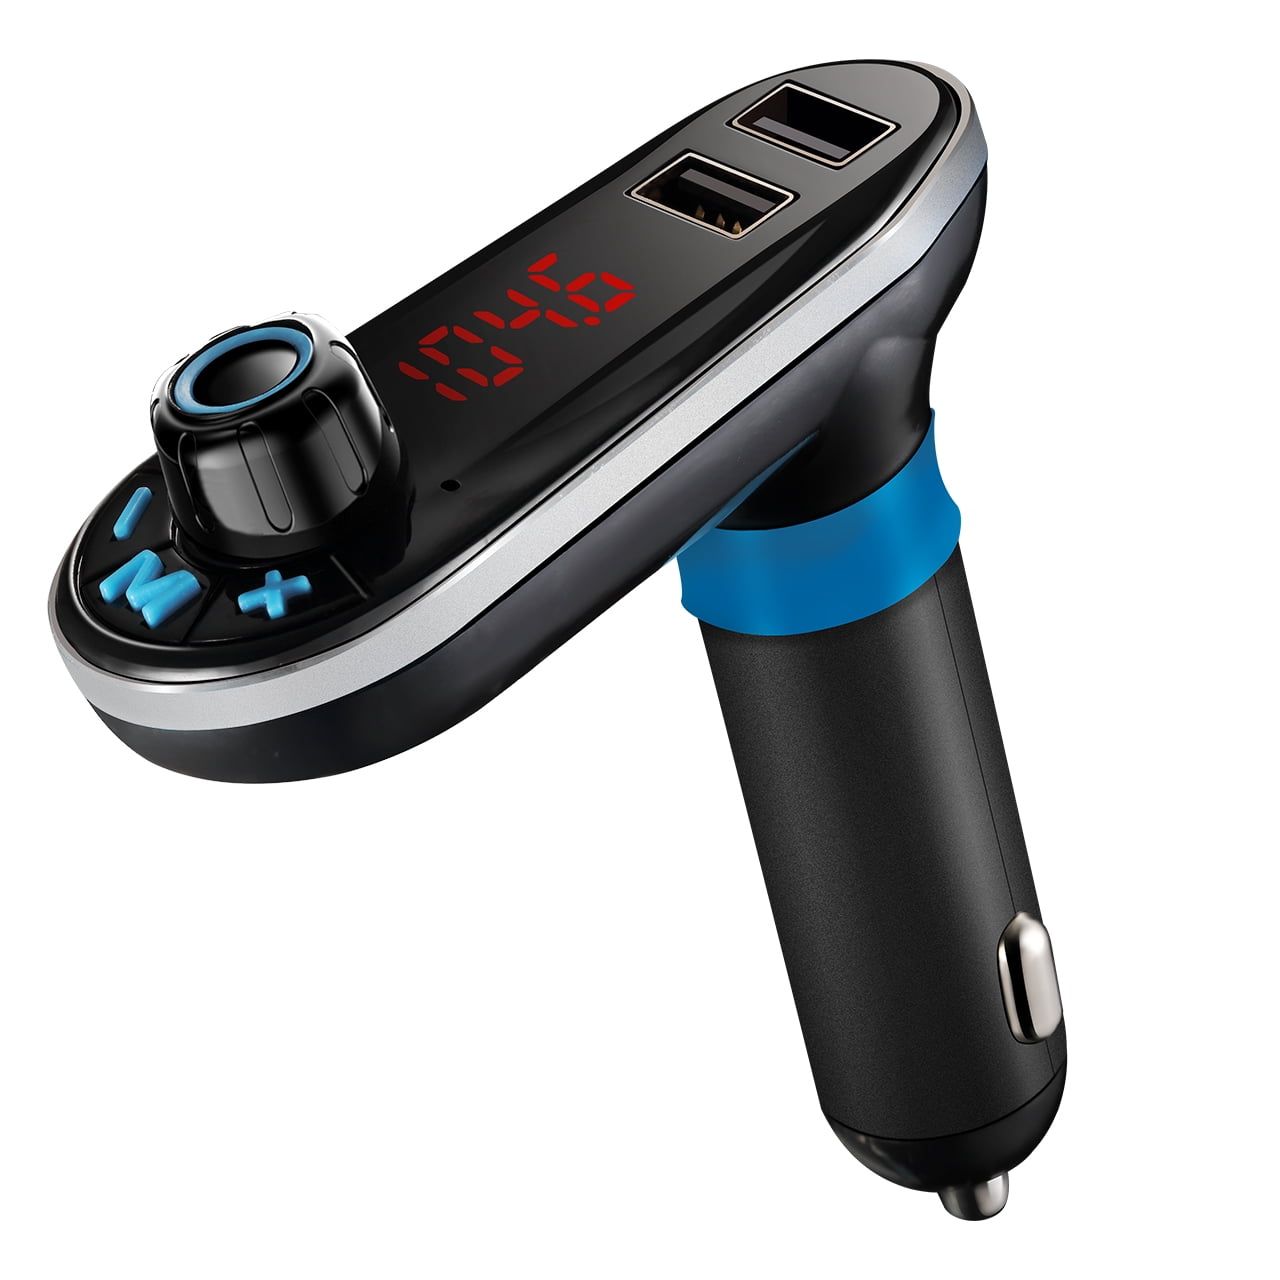 VicTsing Bluetooth FM Transmitter, Hands-free Car Kit Charger, Support TF Card/U-disk ...